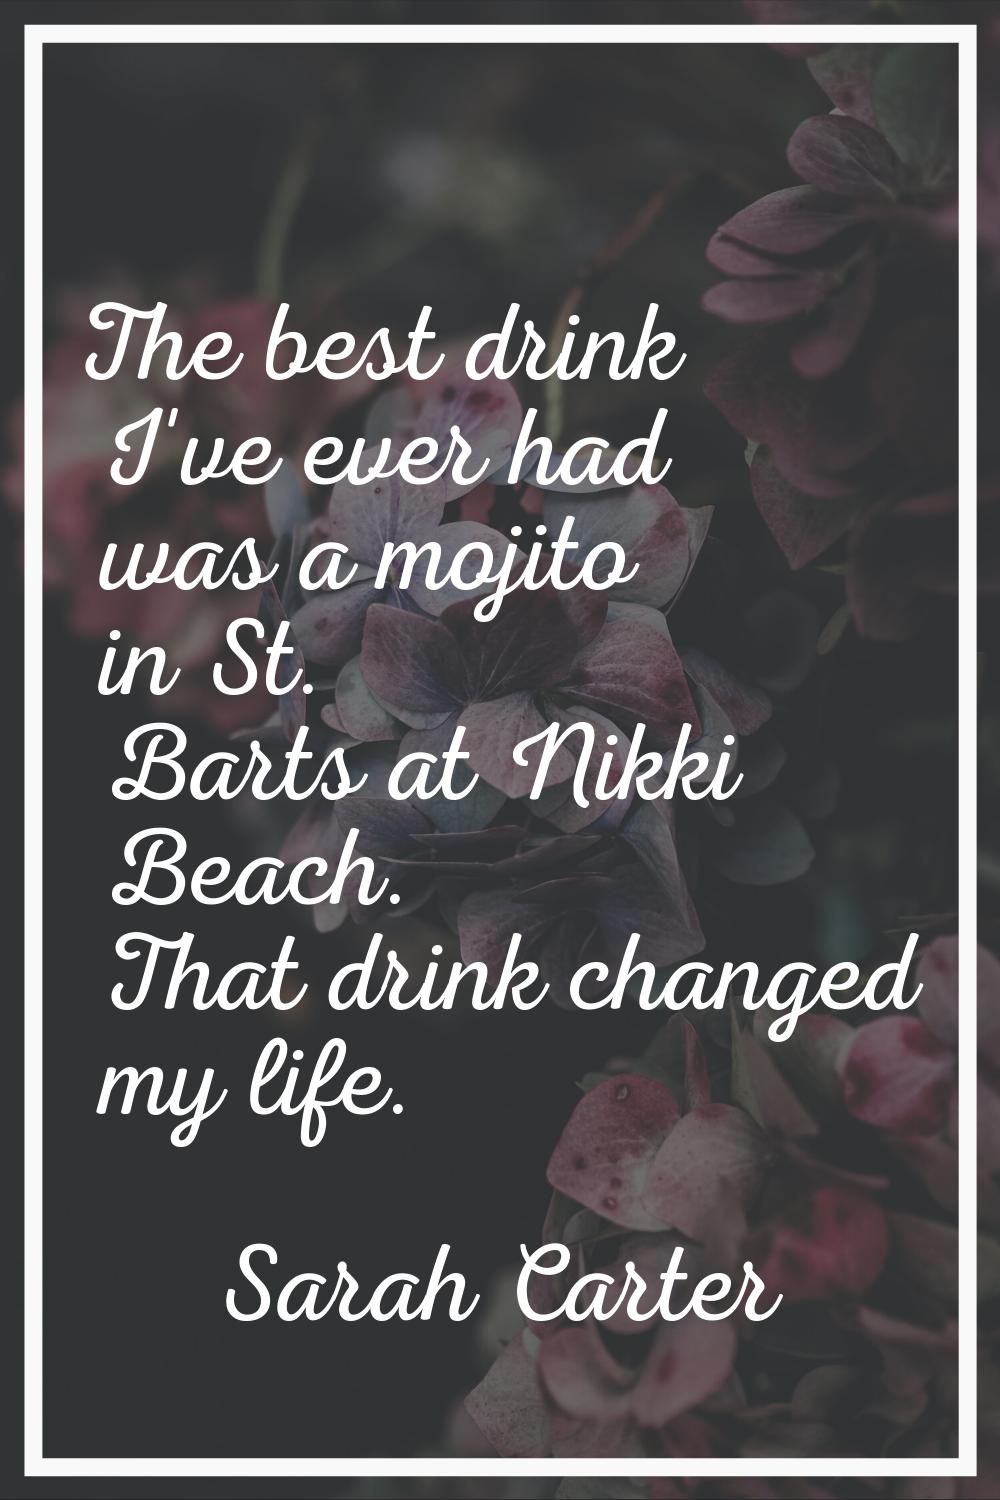 The best drink I've ever had was a mojito in St. Barts at Nikki Beach. That drink changed my life.